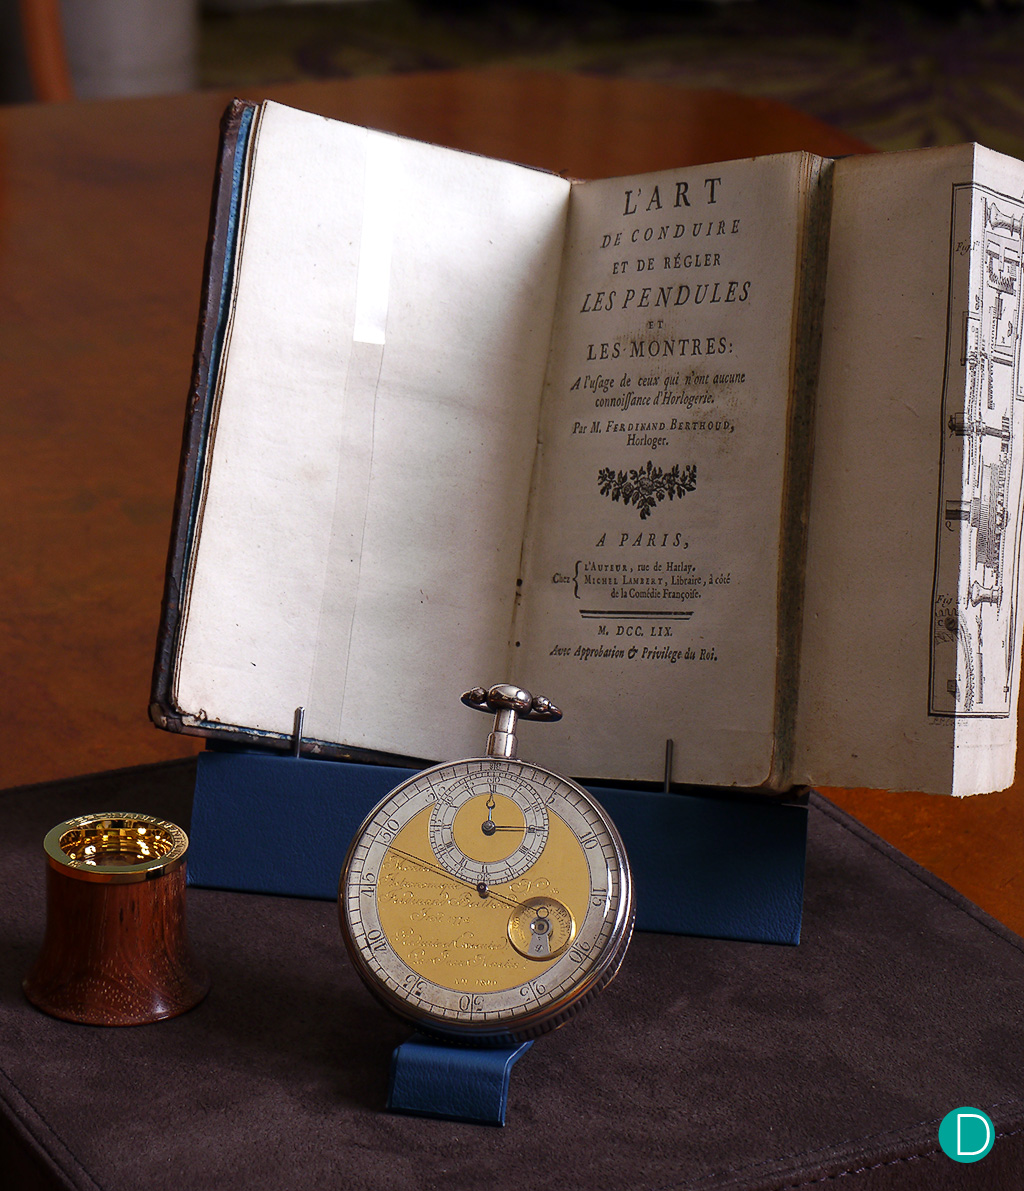 An early F. Berthoud pocket watch and book.